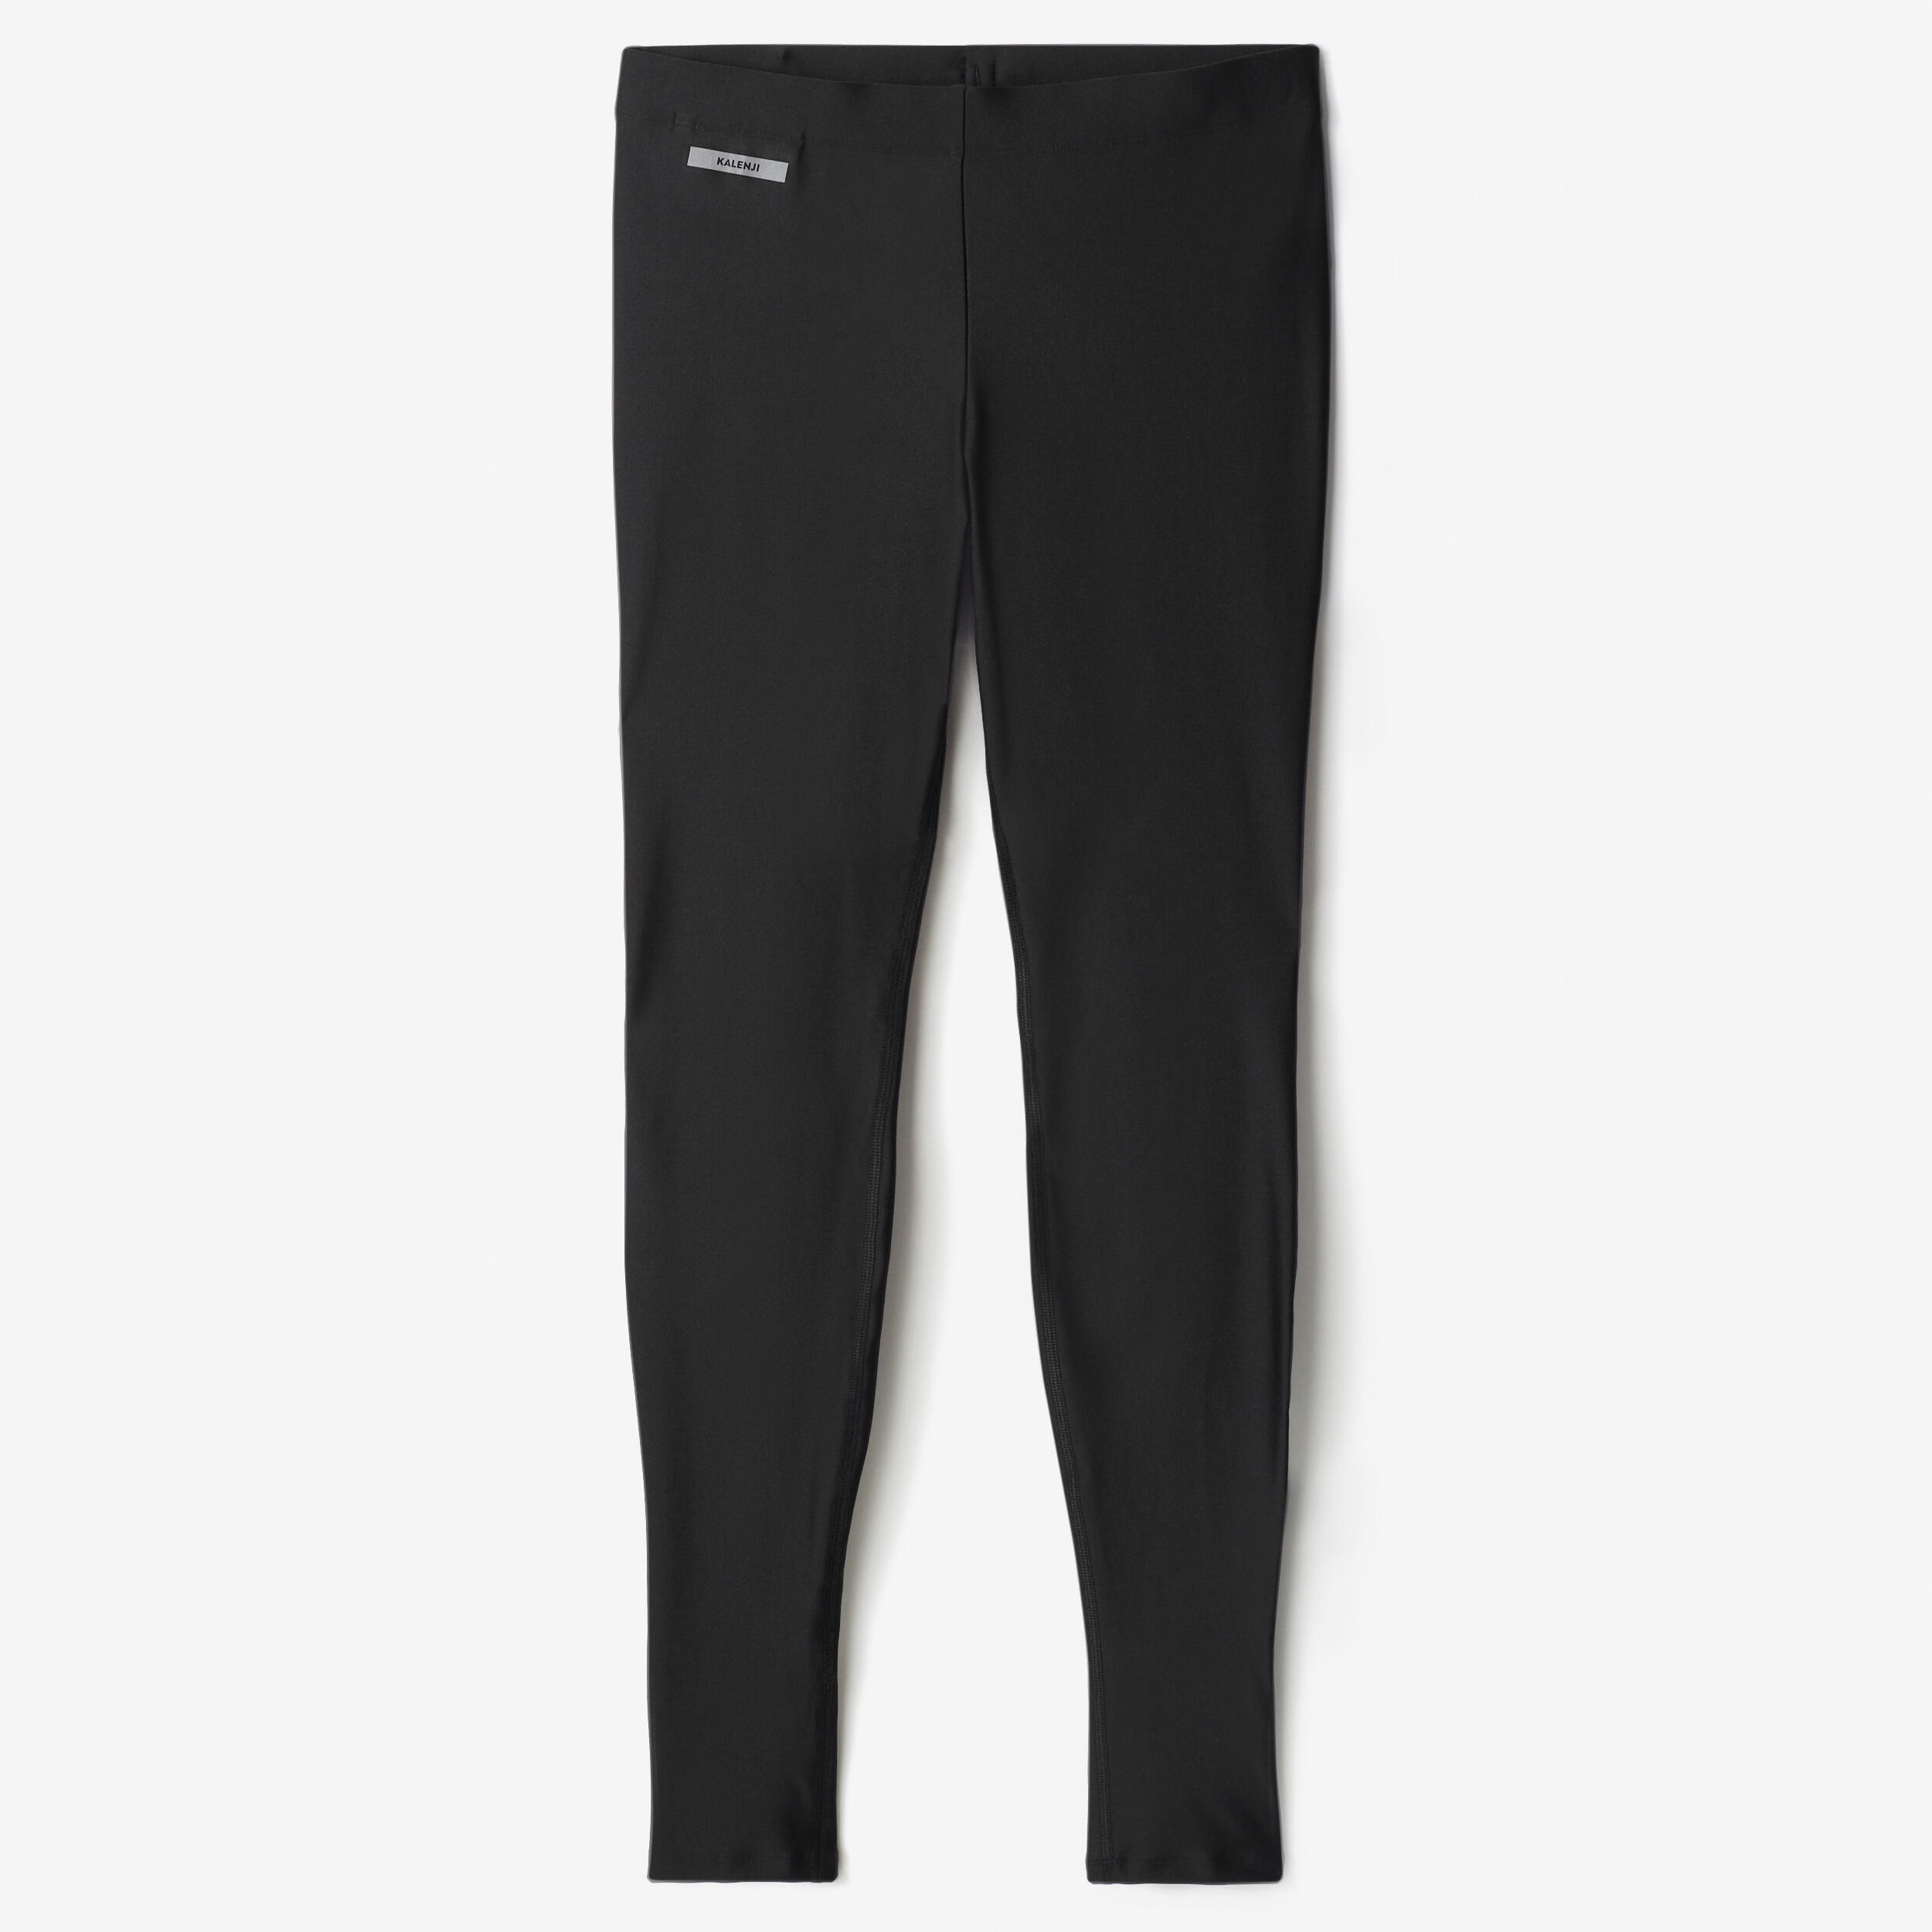 TAILONG Sweat Sauna Pants for Men Hot Thermo Body India | Ubuy